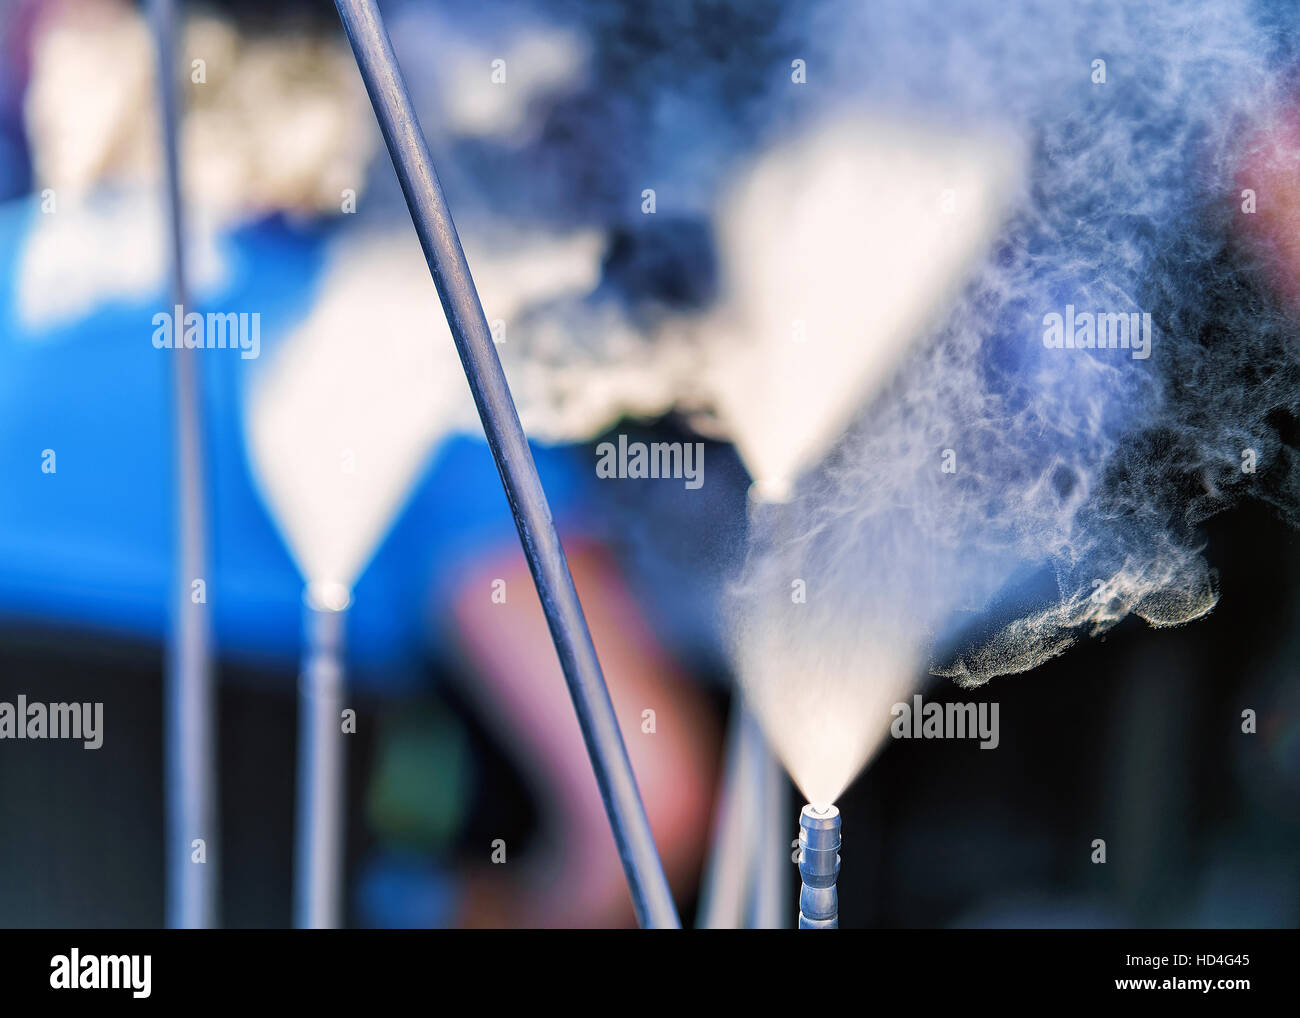 Water Sprayers with mist in the air on the blurred background Stock Photo